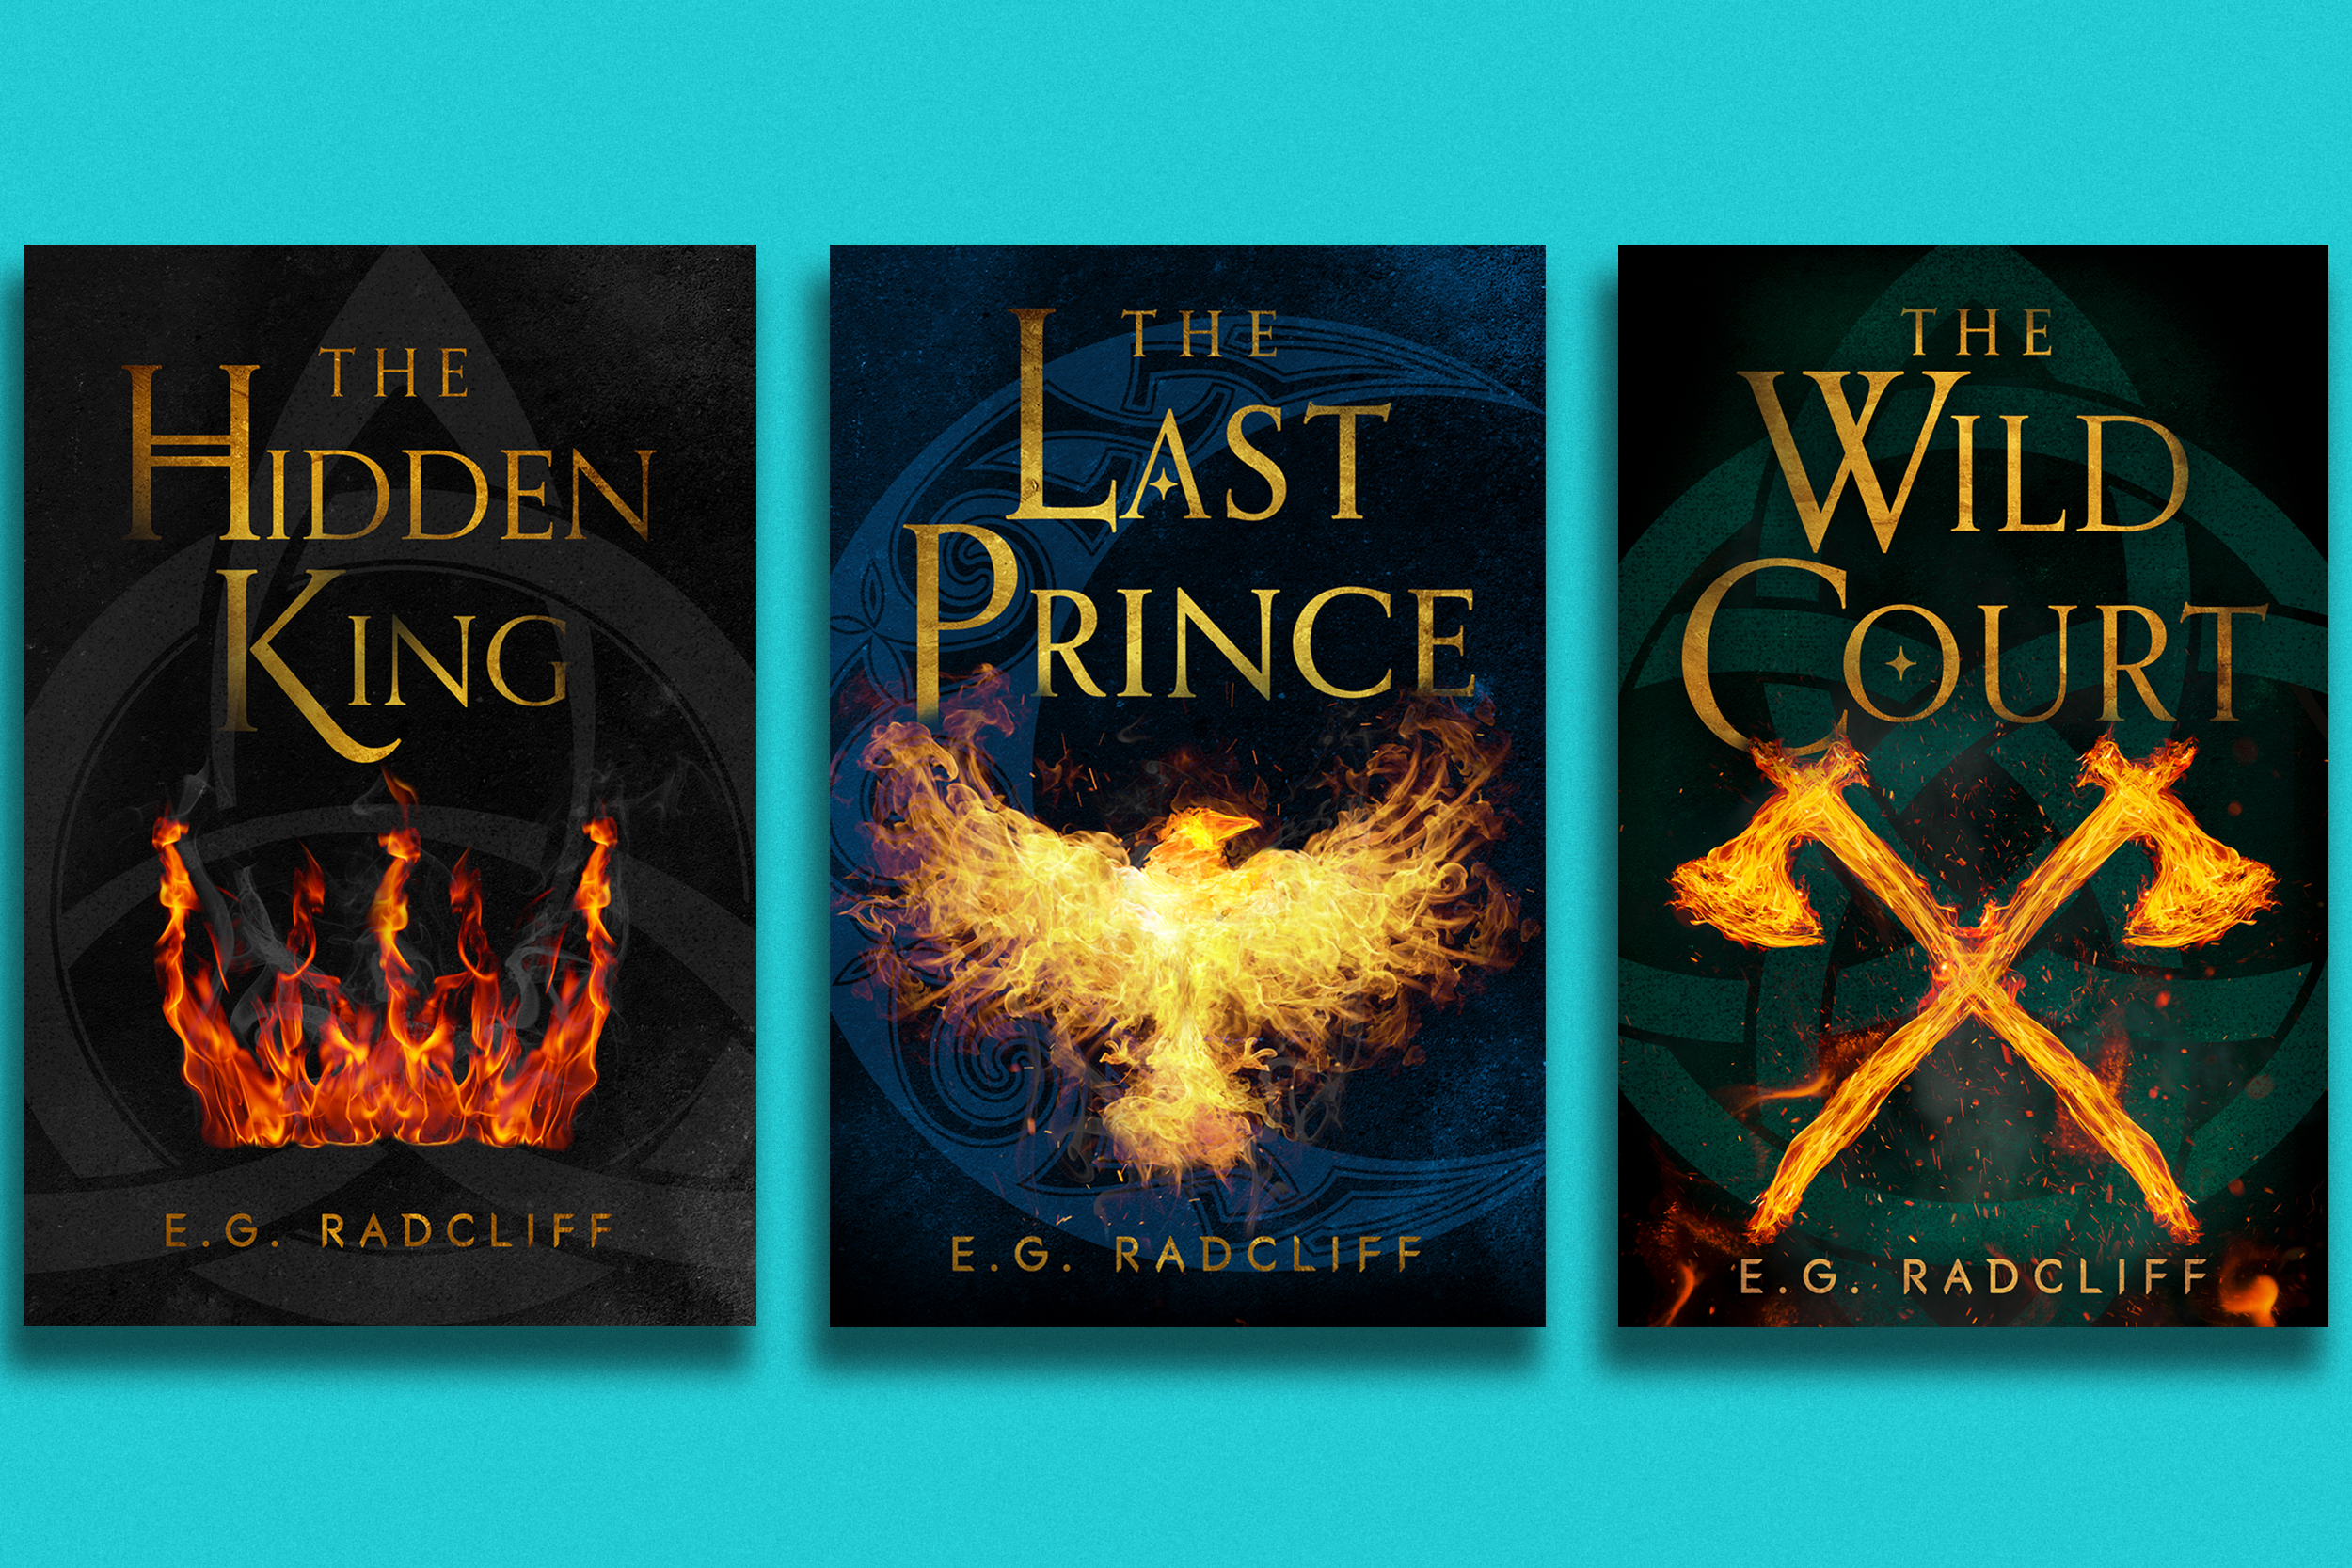 Three books by E.G. Radcliff: left to right: The Hidden King, The Last Prince, and the Wild Court